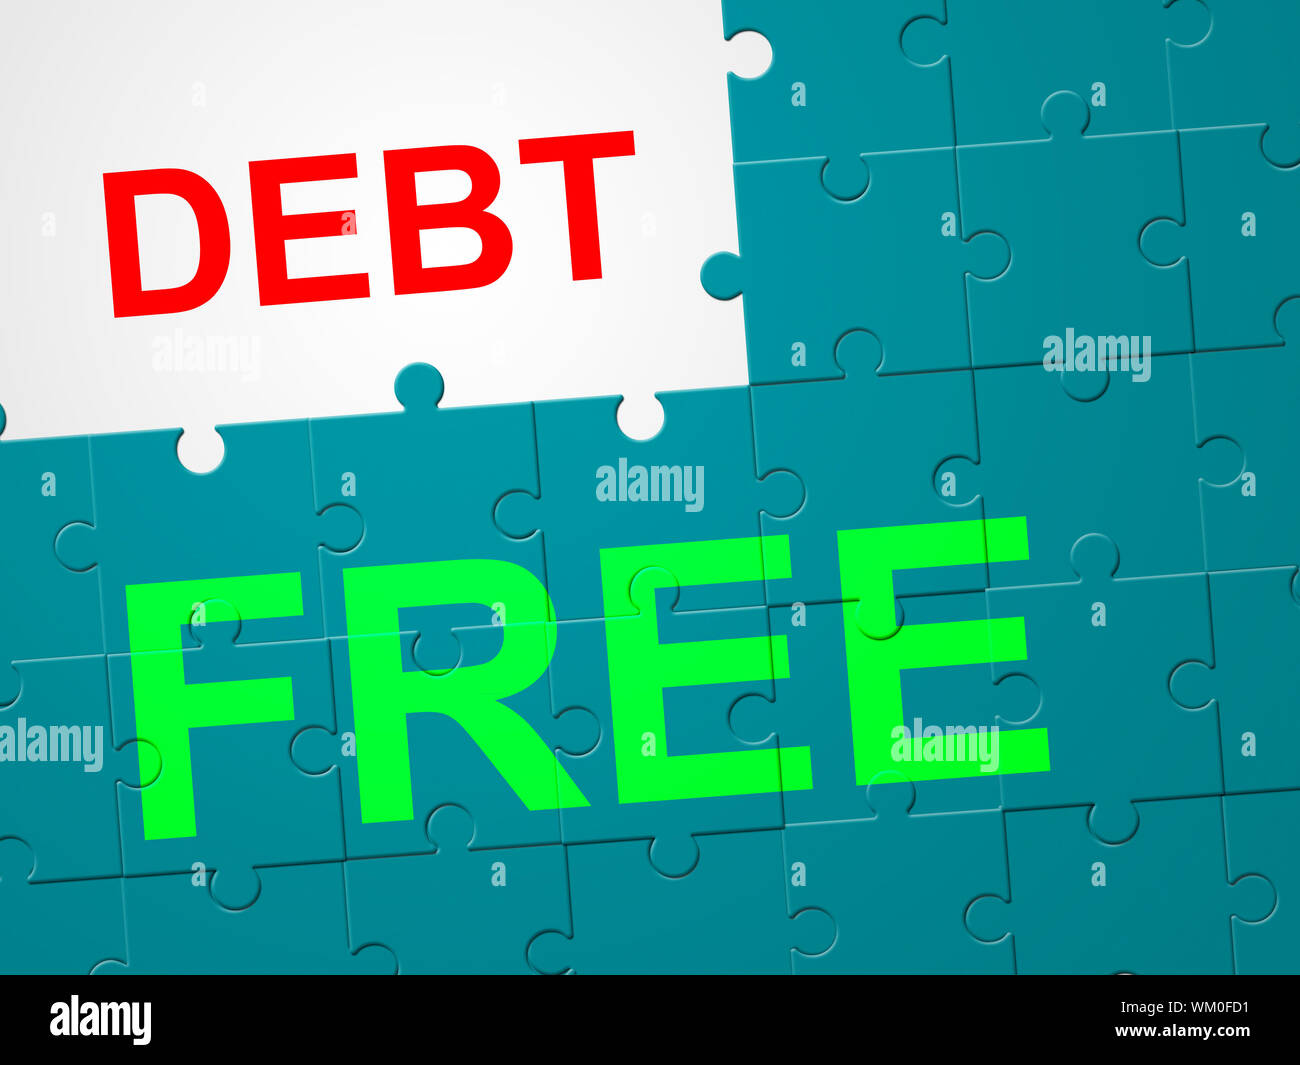 Debt Free Indicating Debit Card And Indebtedness Stock Photo